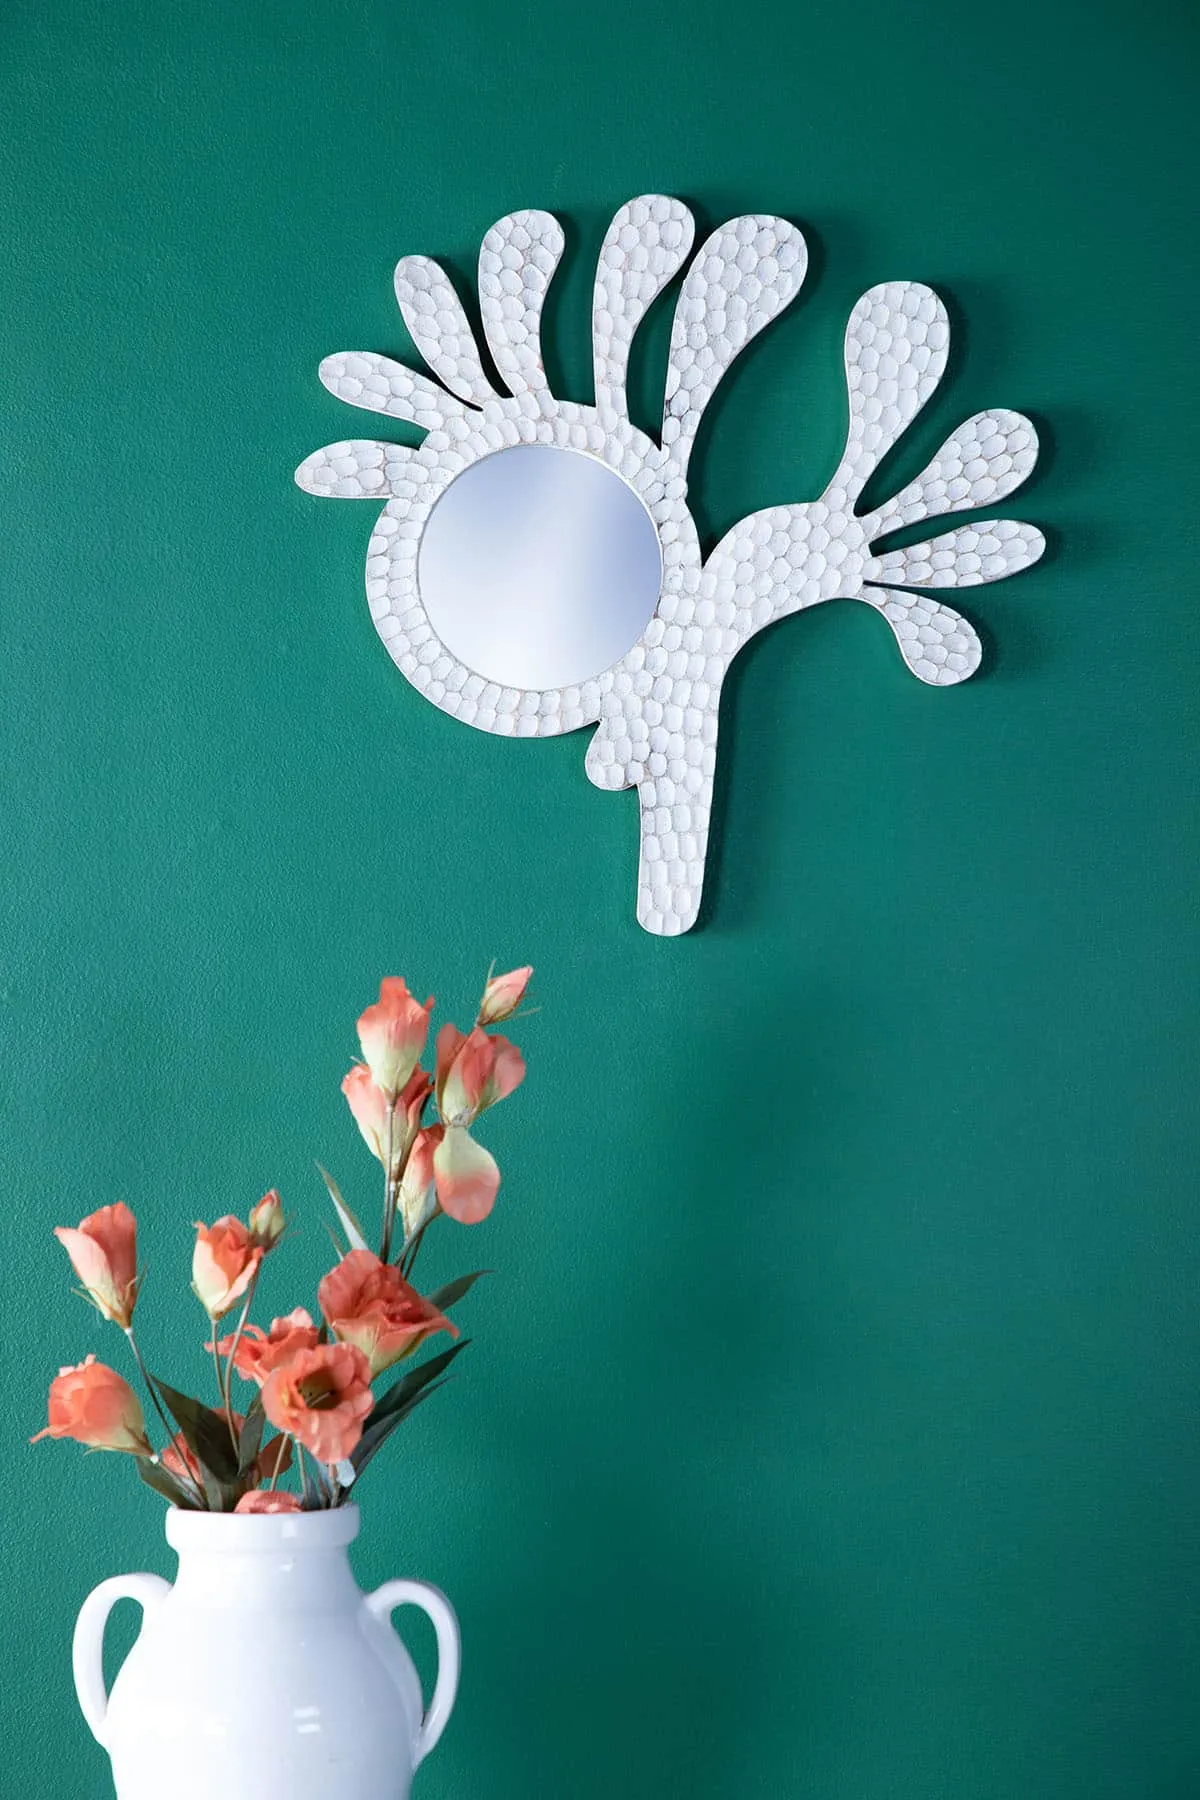 stunning wall ،g decor item for ،me, green coloured wall hanging, vase placed on the table